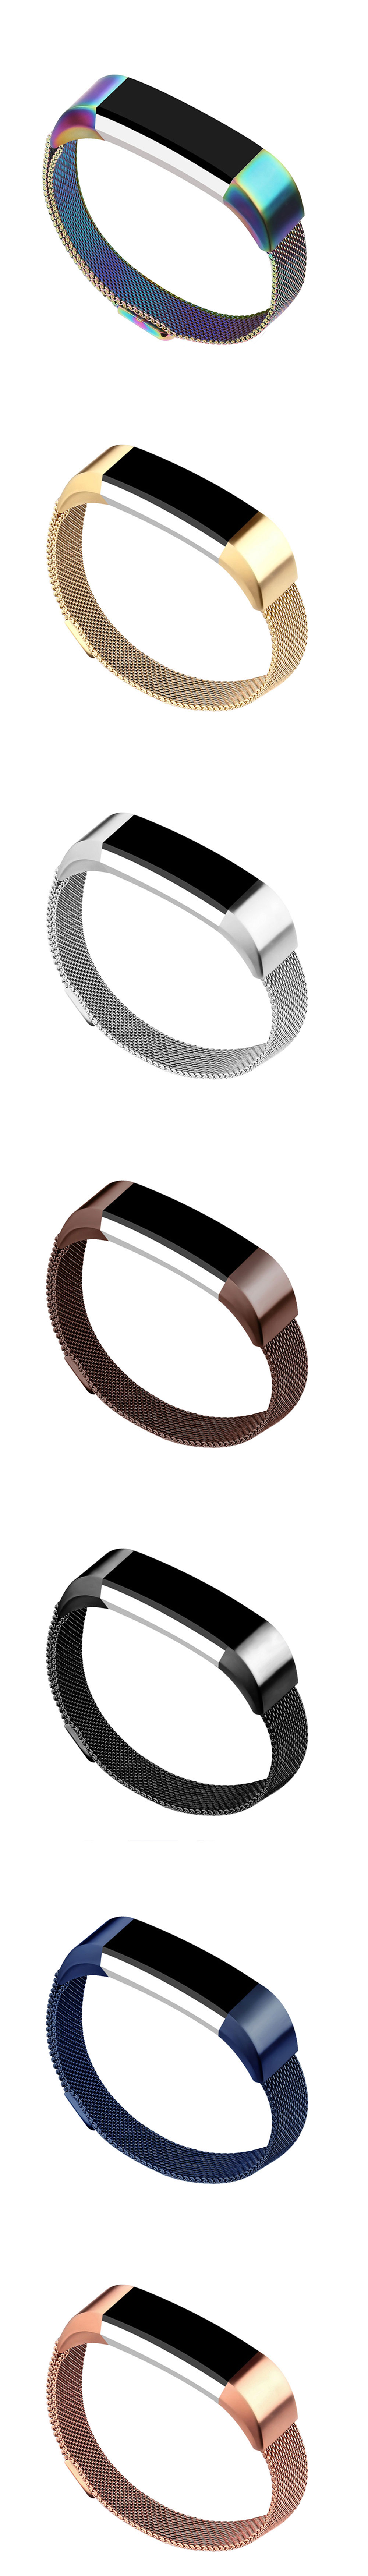 12mm-Watch-Band-Milanese-Loop-Stainless-Steel-Strap-Replacement-for-Fitbit-Alta-Smart-Watch-1289261